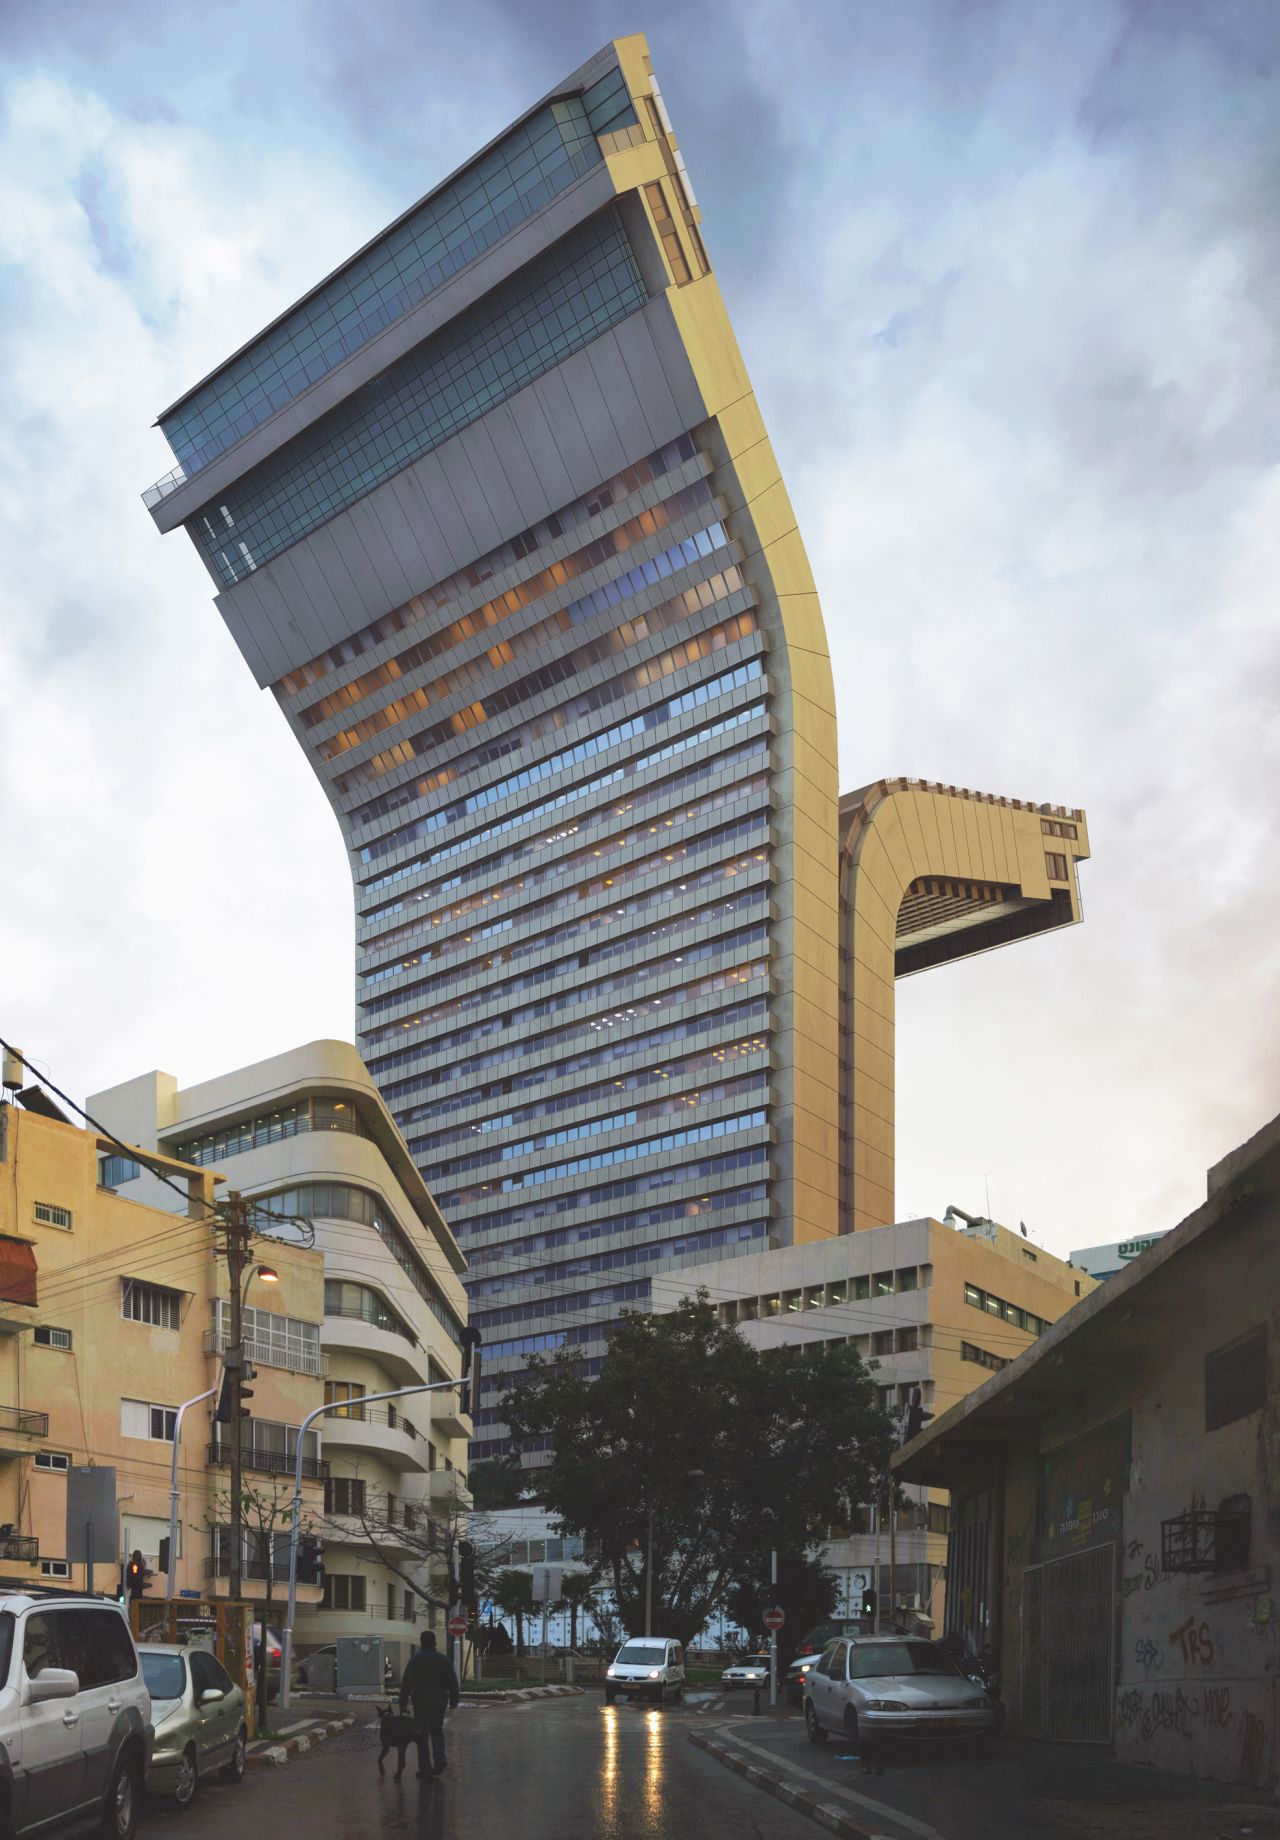 <em>Impossible Buildings by Victor Enrich</em><br /><br />The artworks in <a href="http://shop.gestalten.com/imagine-architecture.html" target="_blank" target="_blank">Imagine Architecture</a> constantly challenge the idea of functionality; in fact, many don't look fit to inhabit. However Feiriess is keen to highlight that architecture isn't just about meeting basic needs. "Both boring and exciting architecture are always an expression of its time and act as the self-representation of a certain culture -- willingly or not."<br /><br />Architecture, it seems, constantly mirror the world back to us. "The shape of our cities, even today, reflect certain power structures, and represent, so to speak, an image of the world."